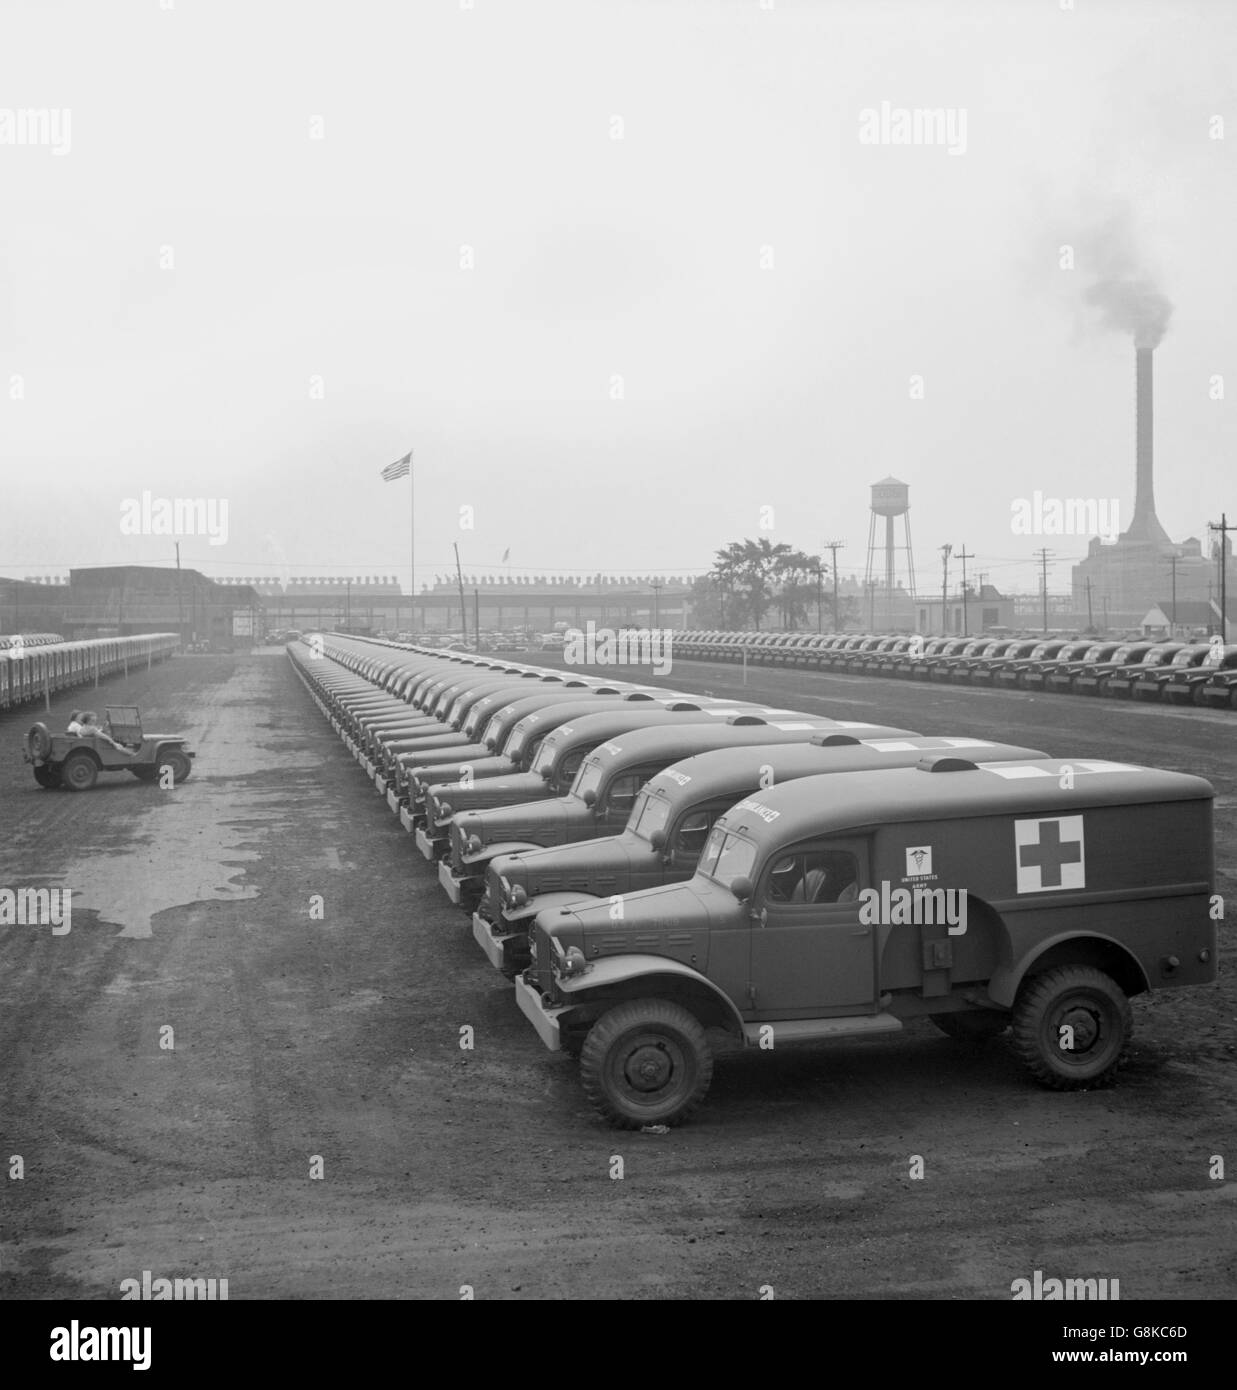 Rows of Army Ambulances, Chrysler Corporation Dodge Truck Plant, Detroit, Michigan, USA, Arthur S. Siegel for Office of War Information, August 1942 Stock Photo